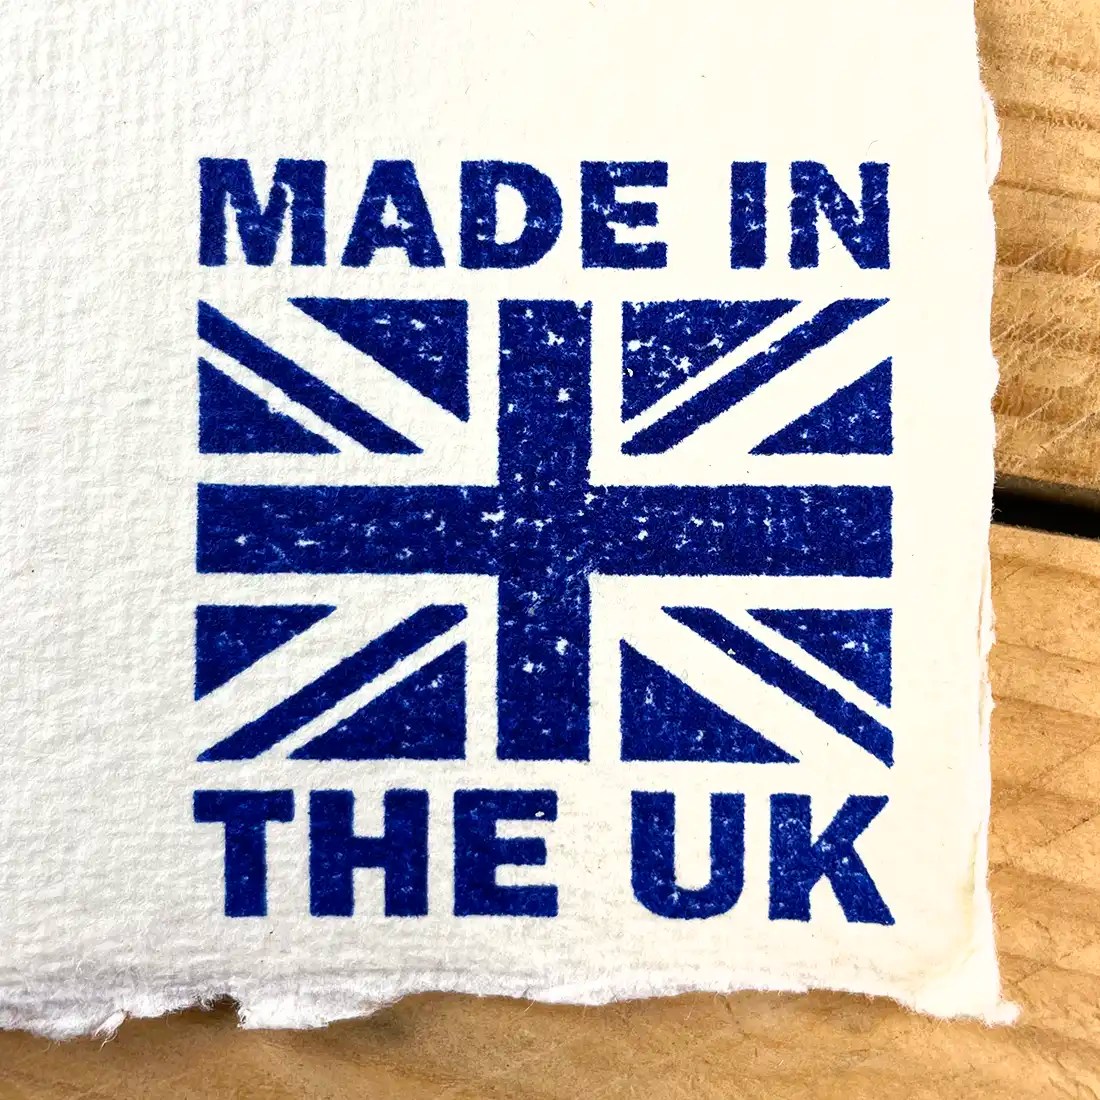 Made in the uk rubber stamp